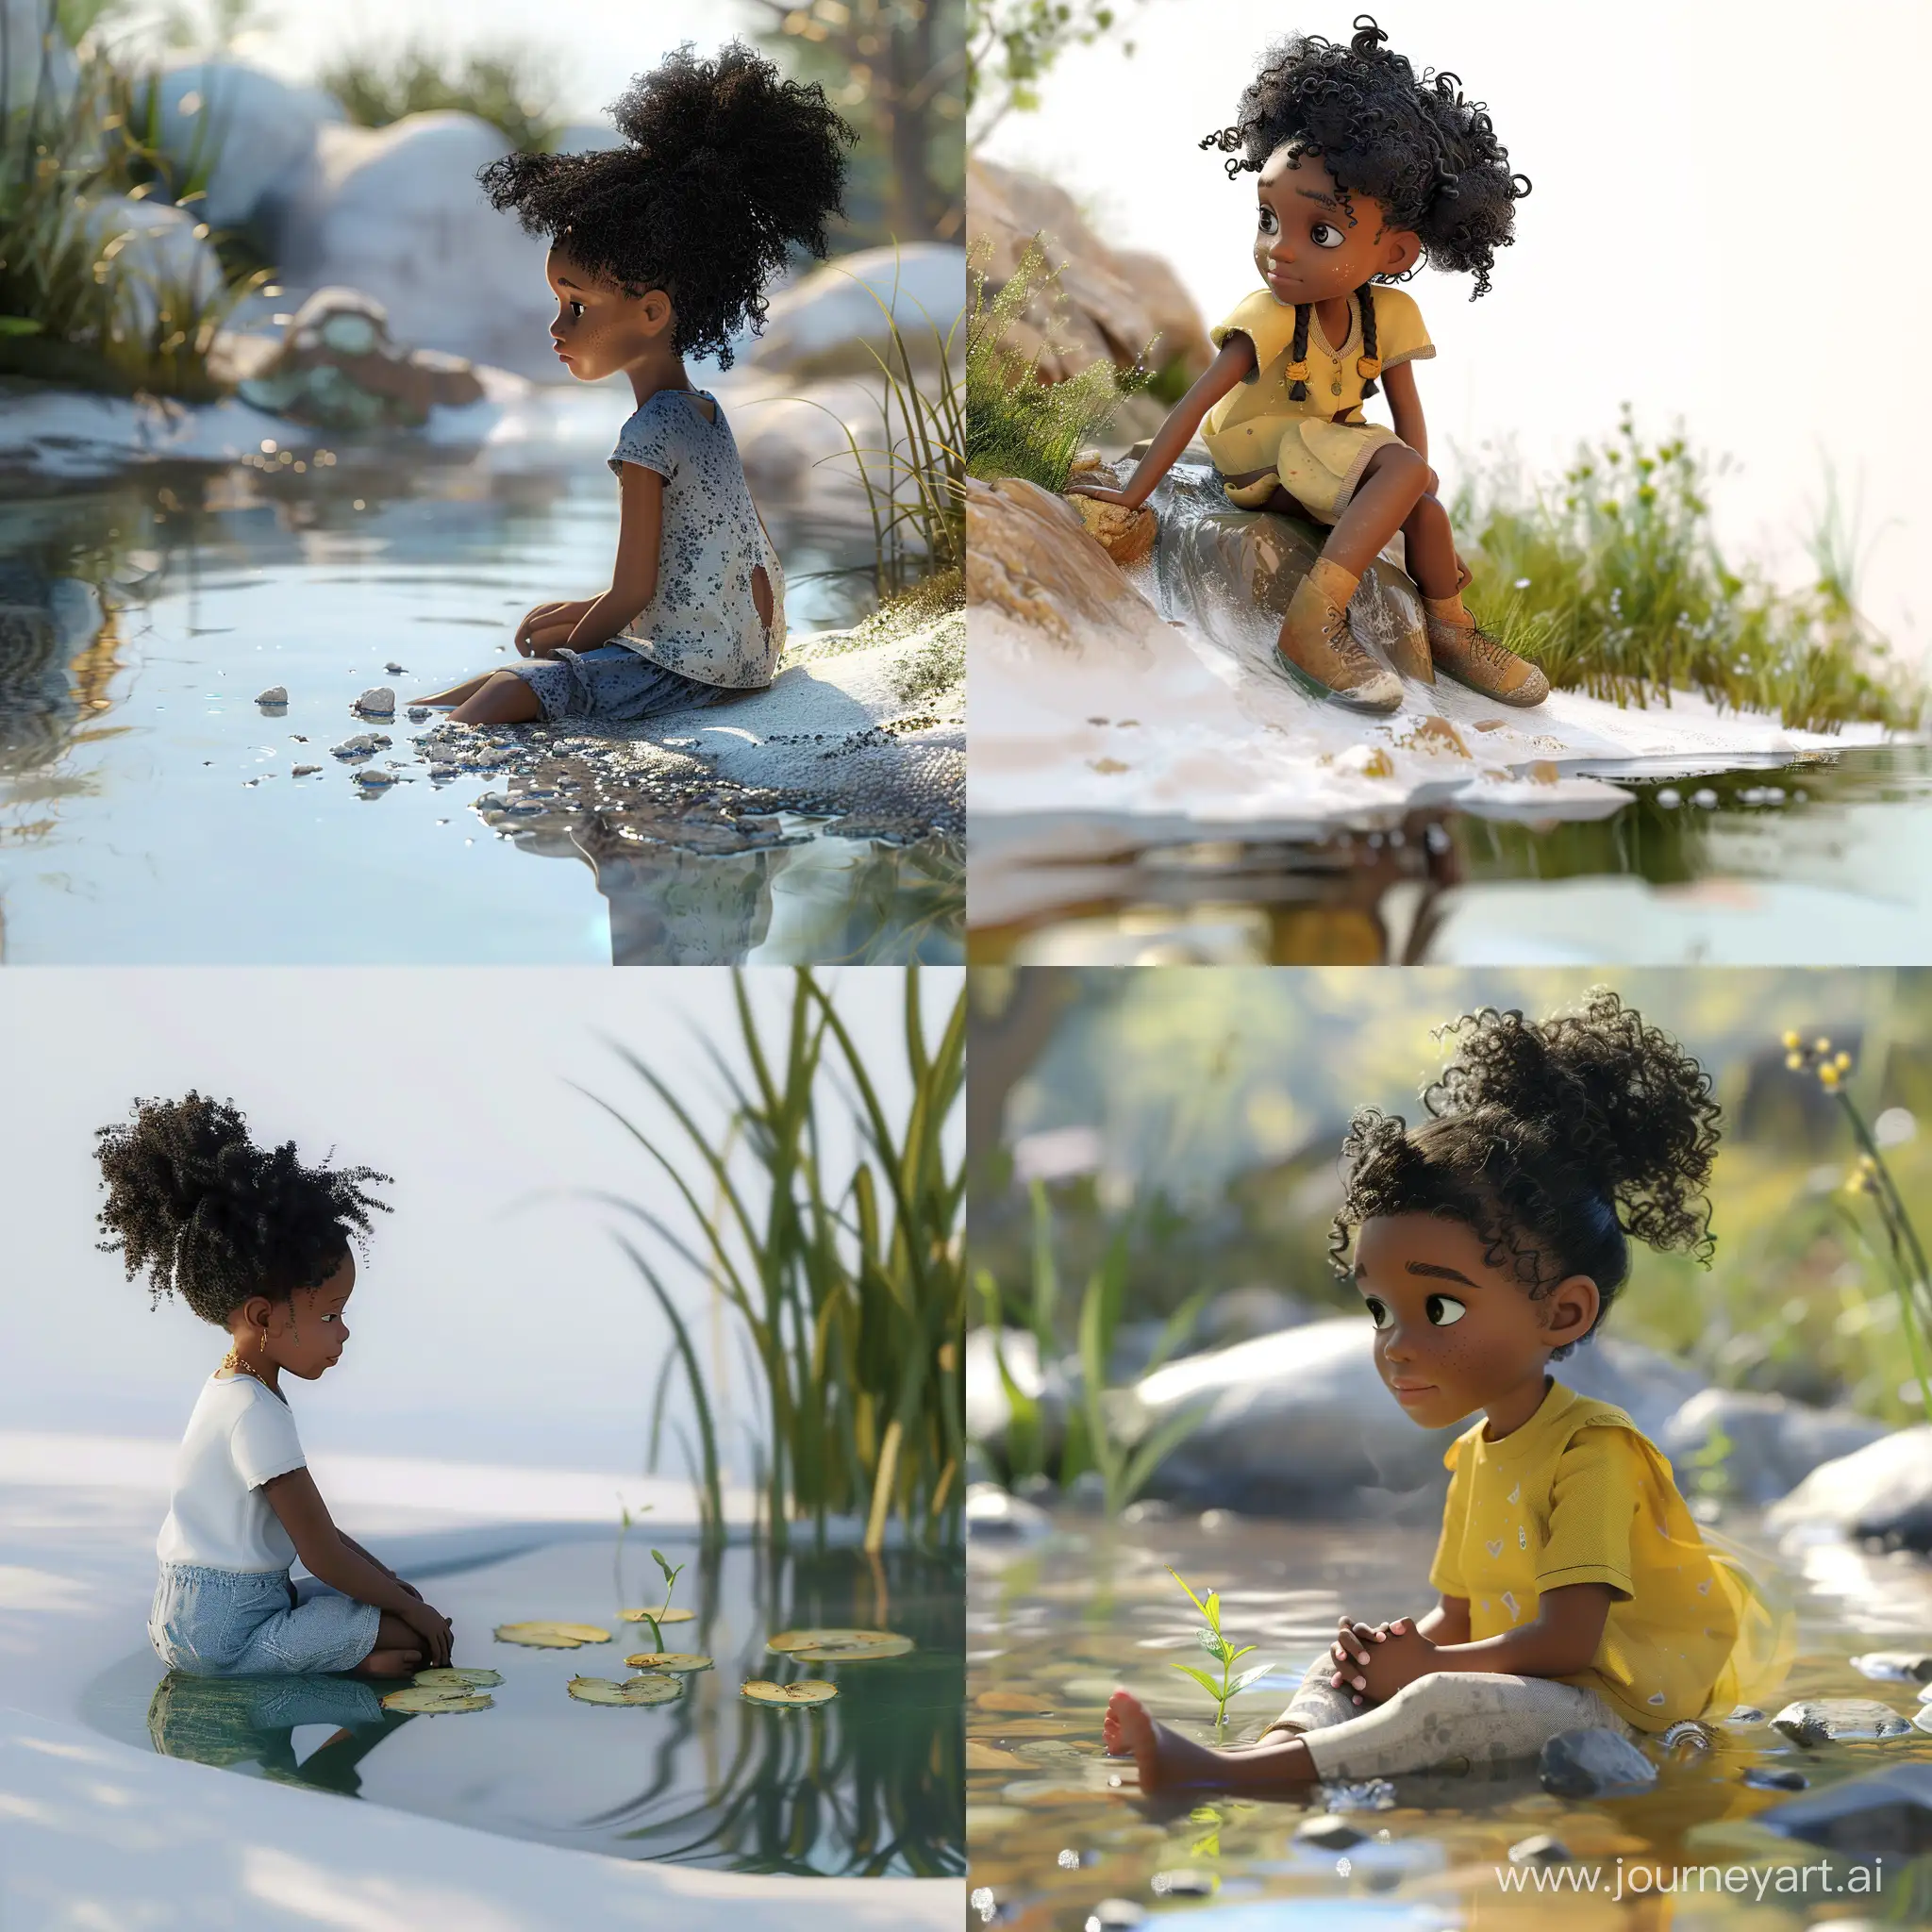 Young-Black-Girl-by-a-Spring-Childrens-Book-Style-Illustration-with-Unreal-Engine-5-Pixar-and-Disney-Influence